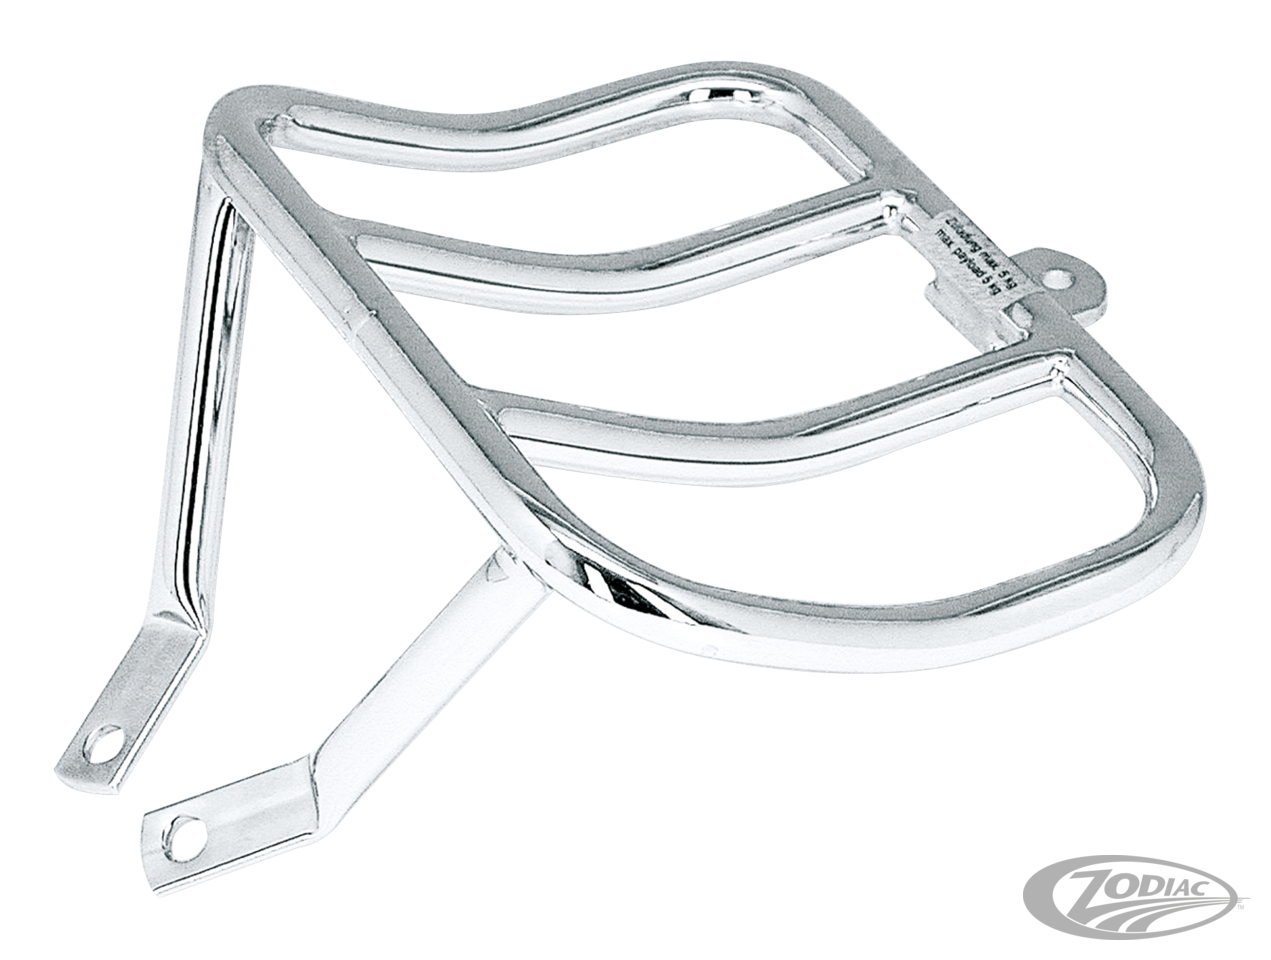 Luggage rack FXD00-05 - Downtown American Motorcycles